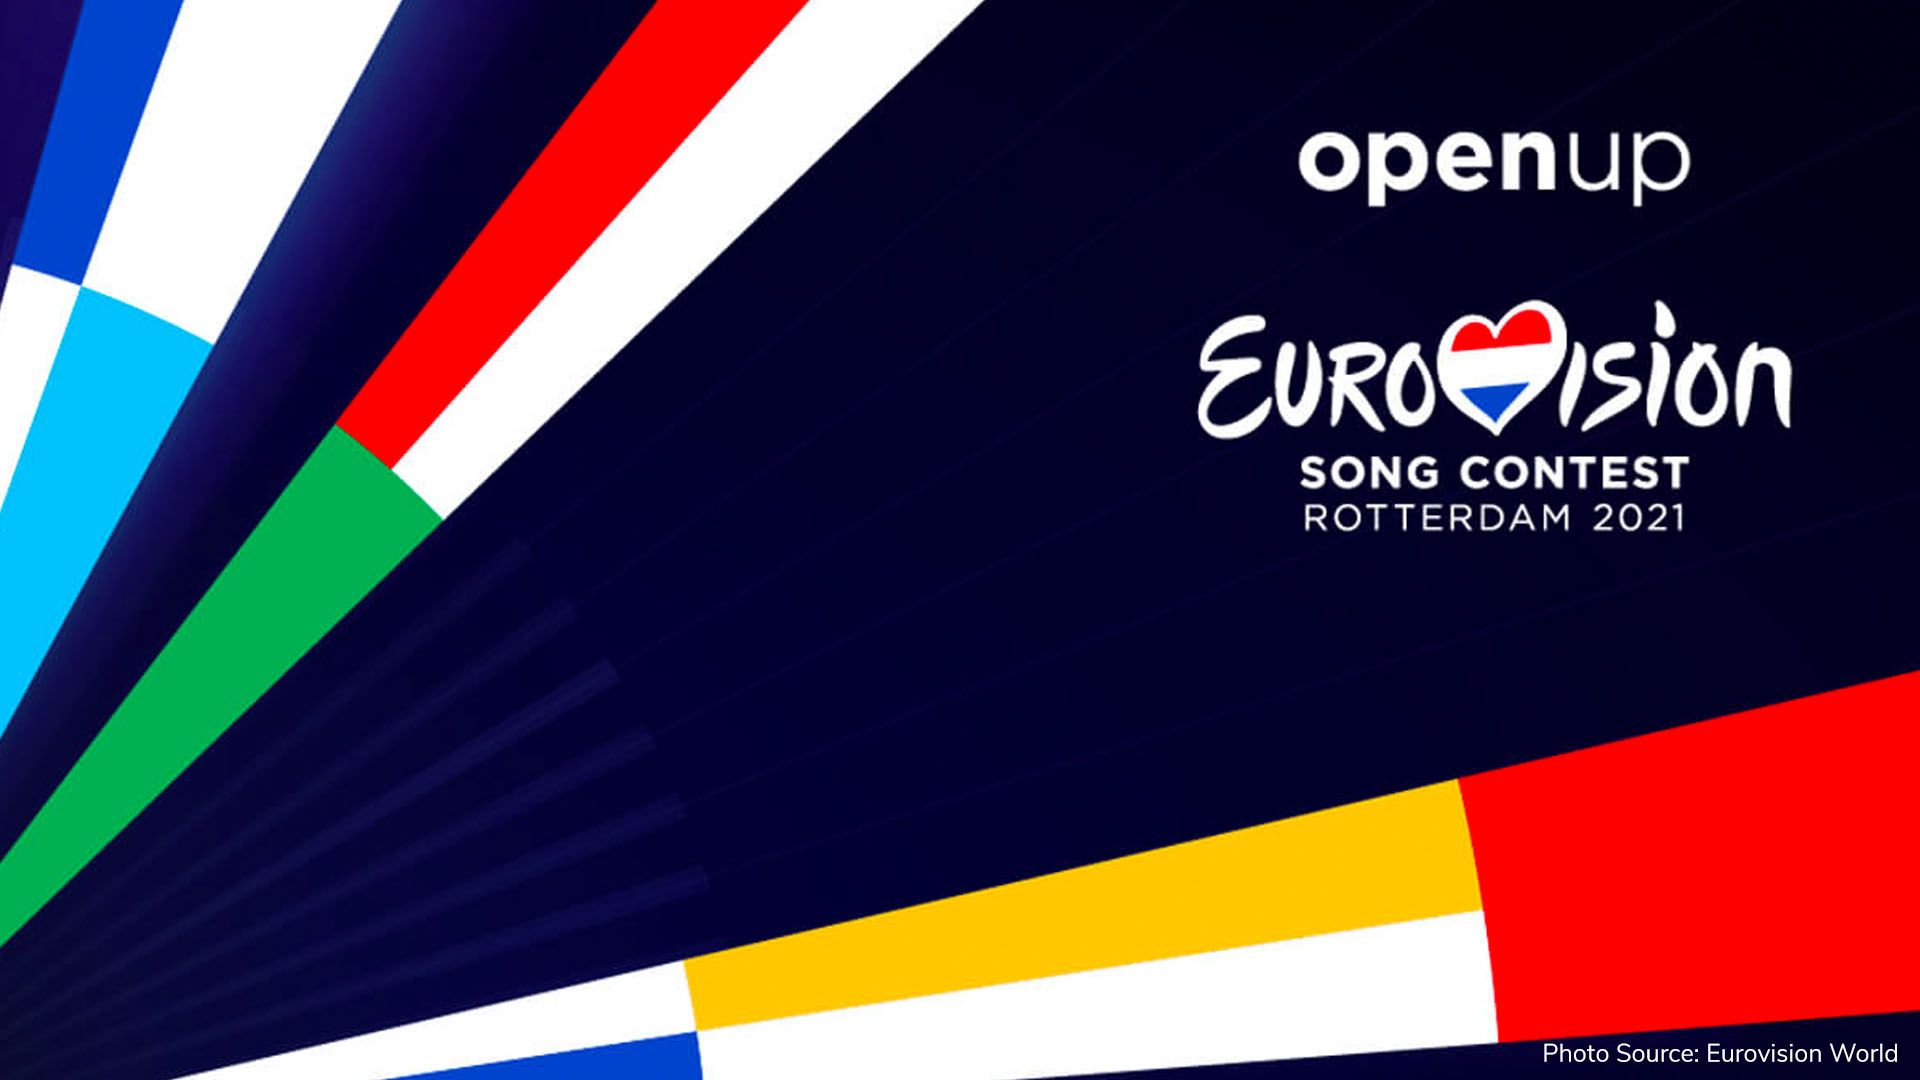 Eurovision to allow spectators for COVID-19 party trials